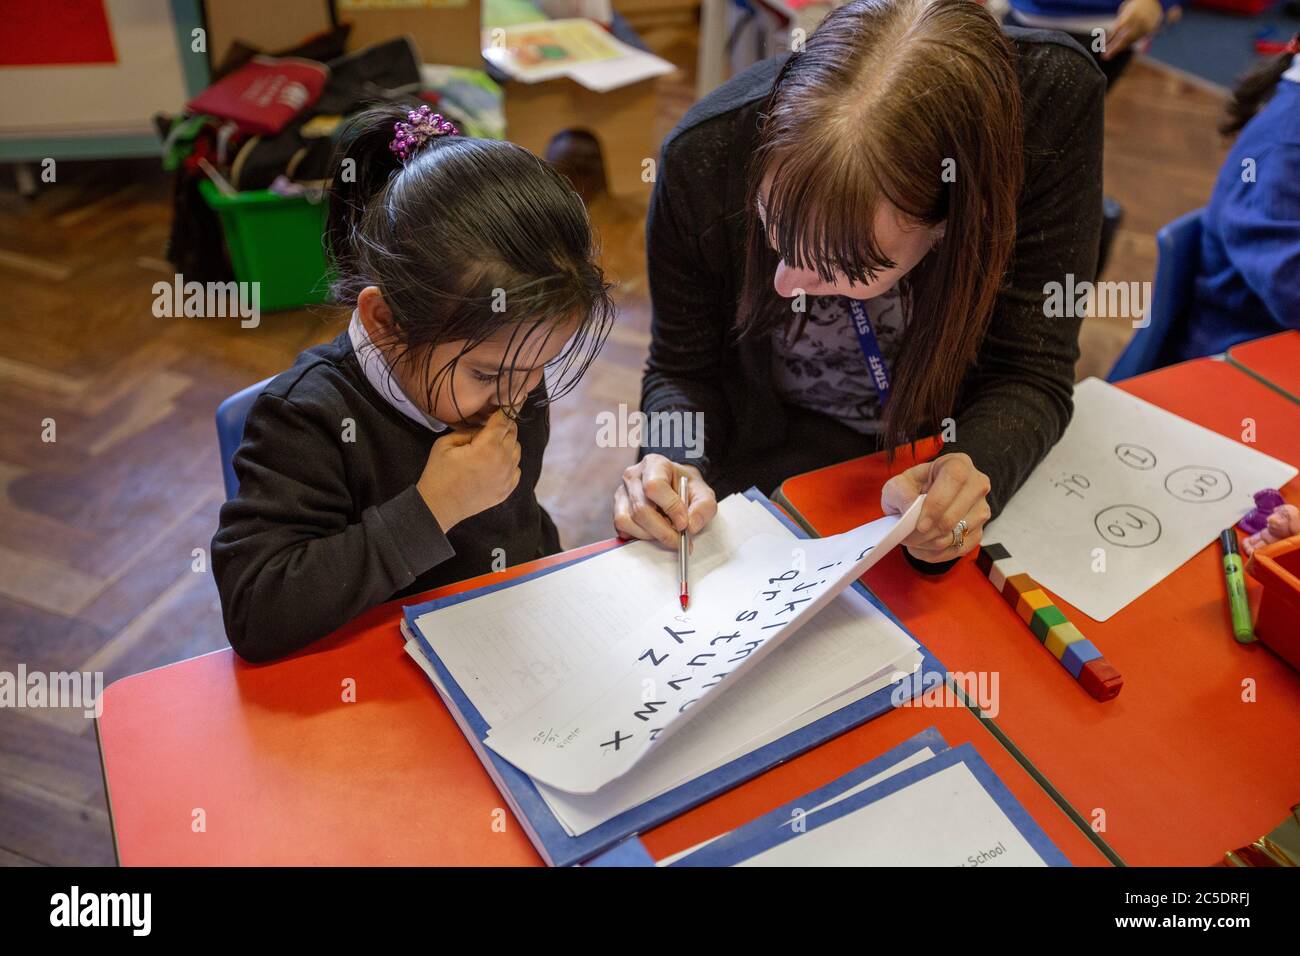 A teacher helps a schoolgirl during an English class in the UK Stock Photo